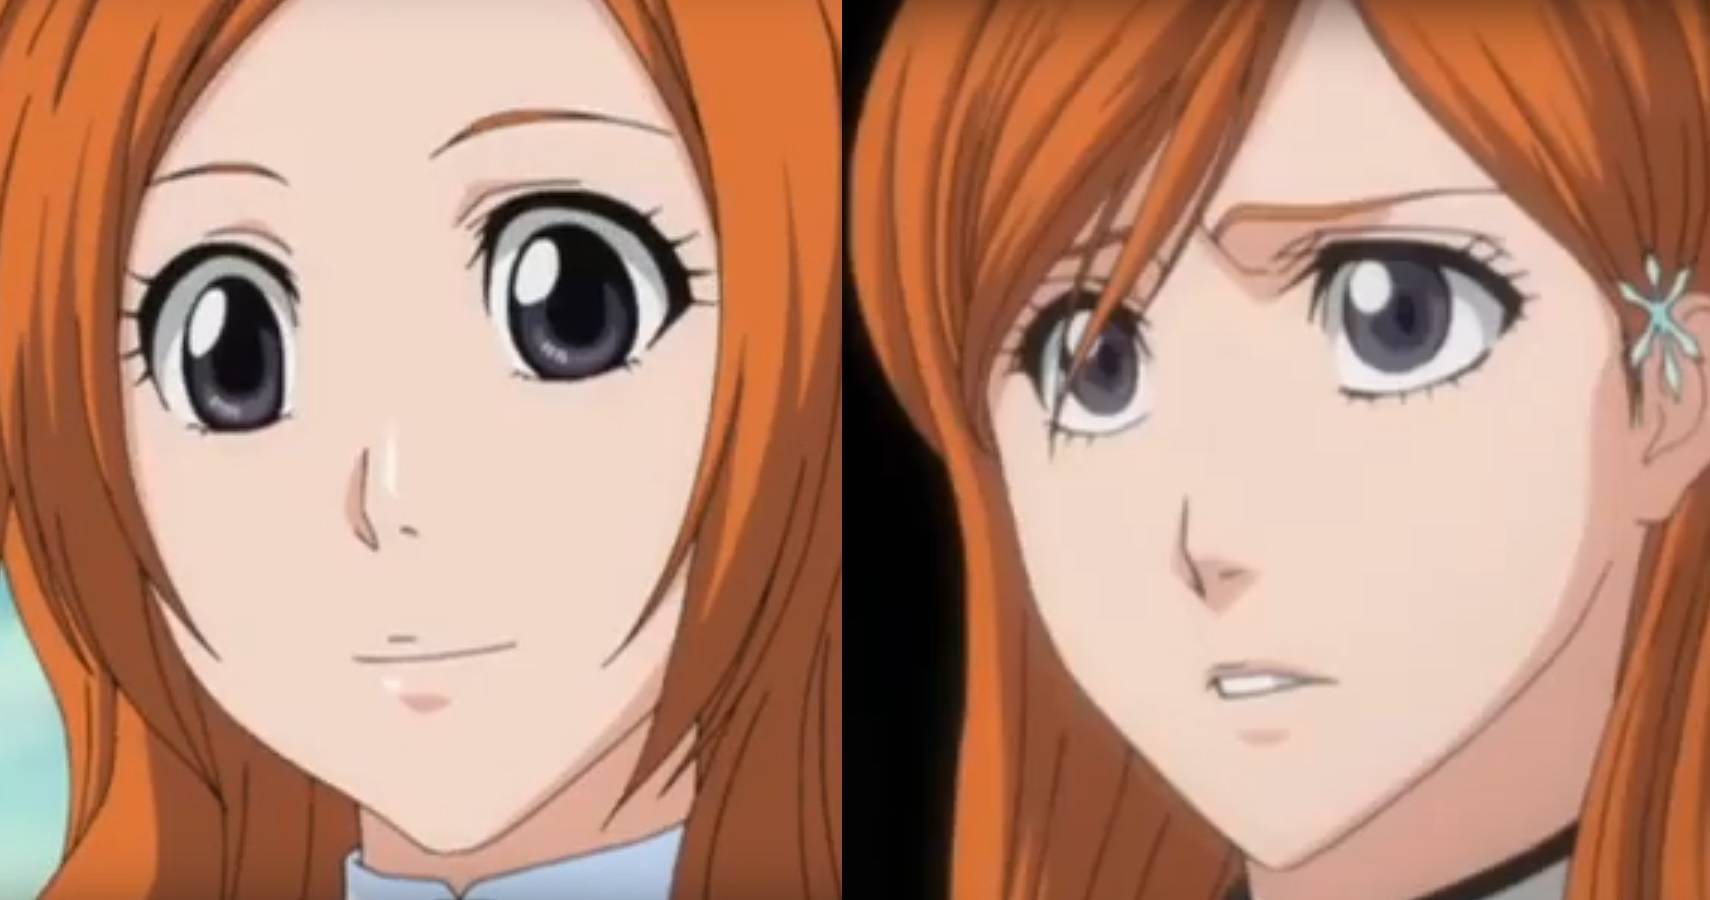 How old is orihime